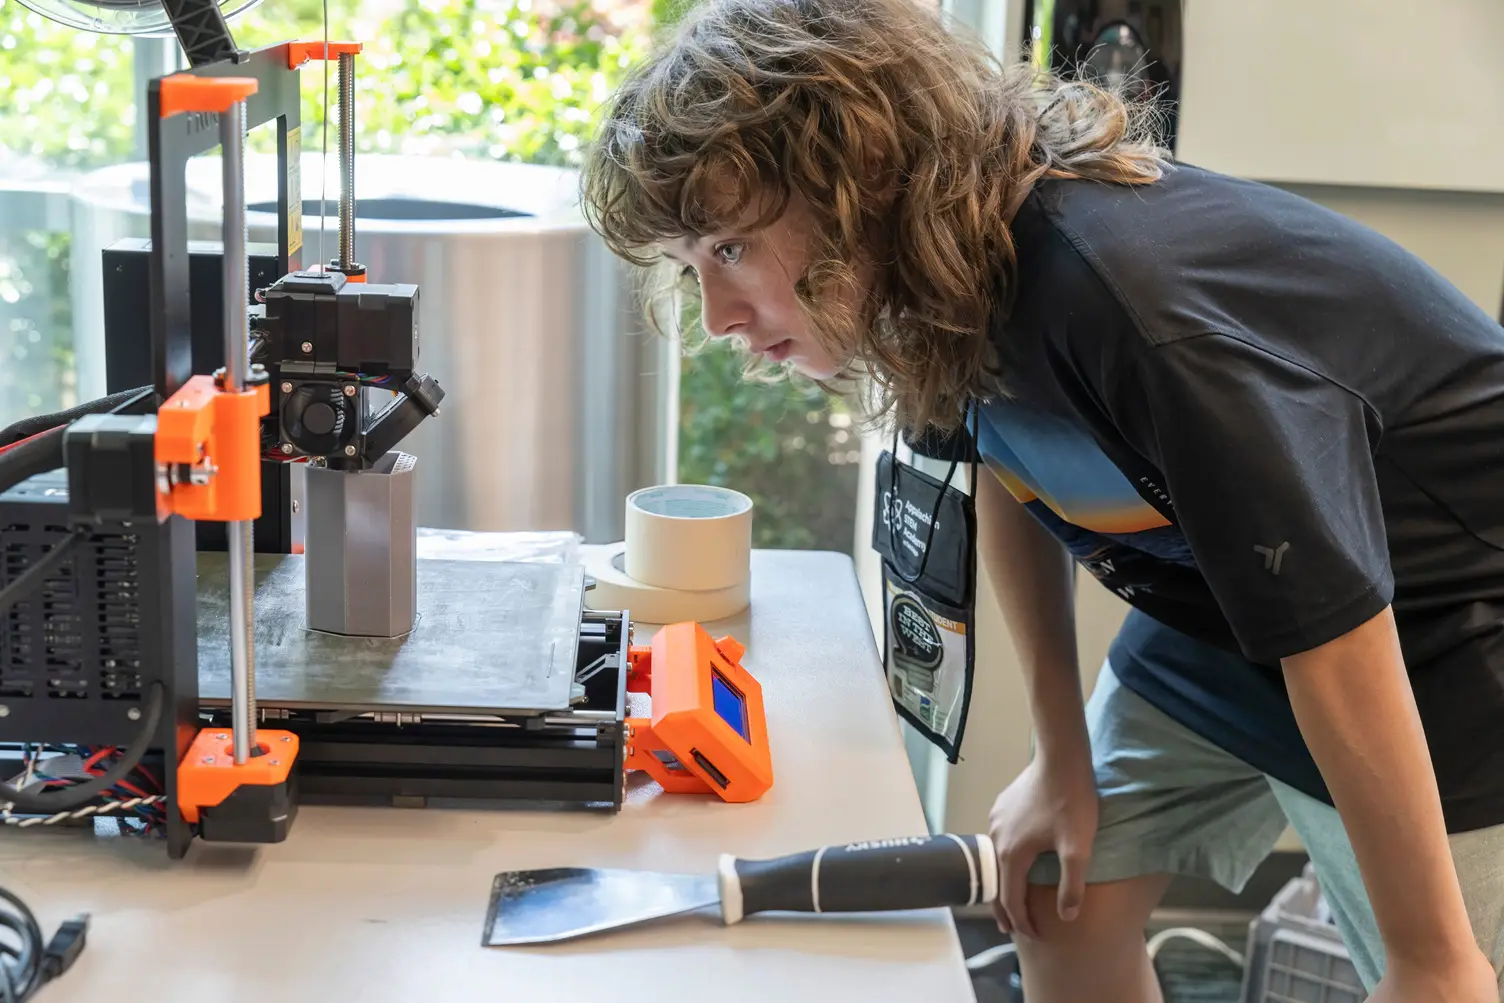 A male student works on a 3D printing research project during the Appalachian STEM Academy